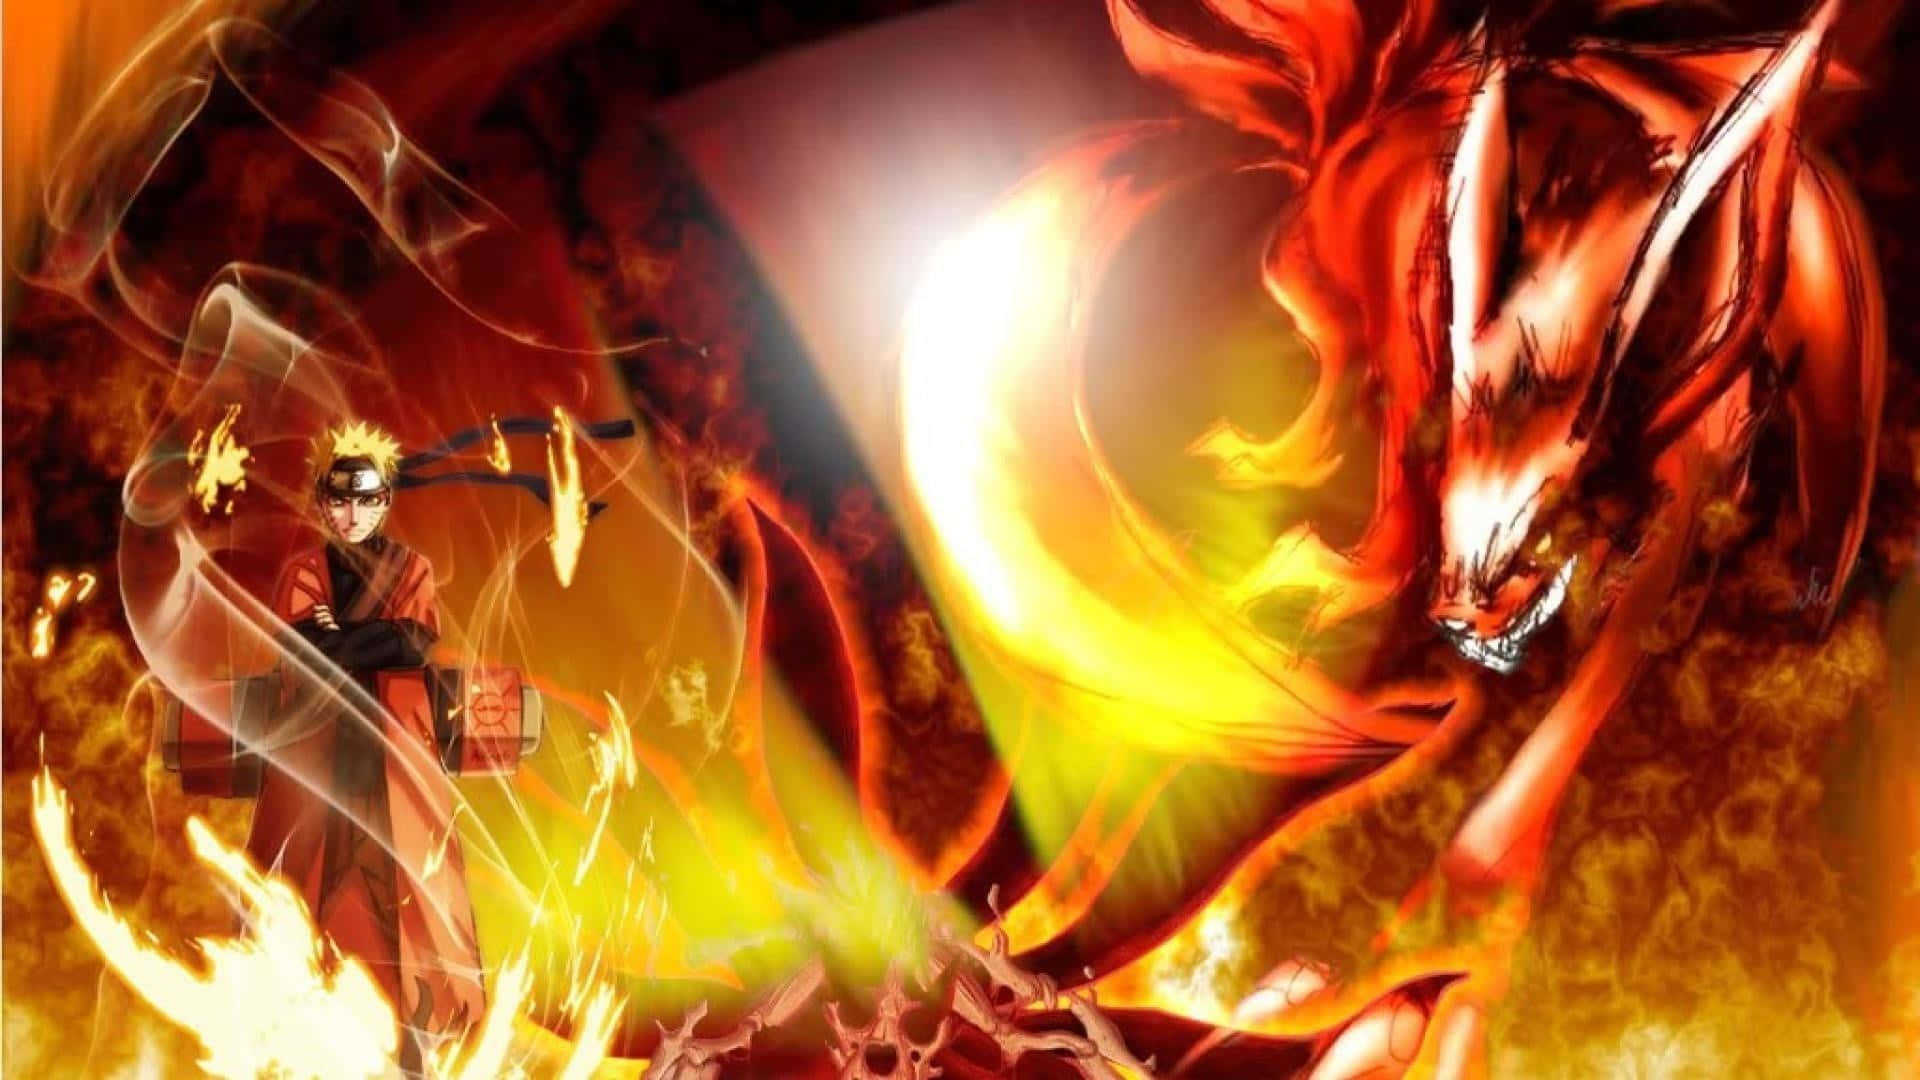 Feel the Fire of Naruto's 9 Tails Wallpaper